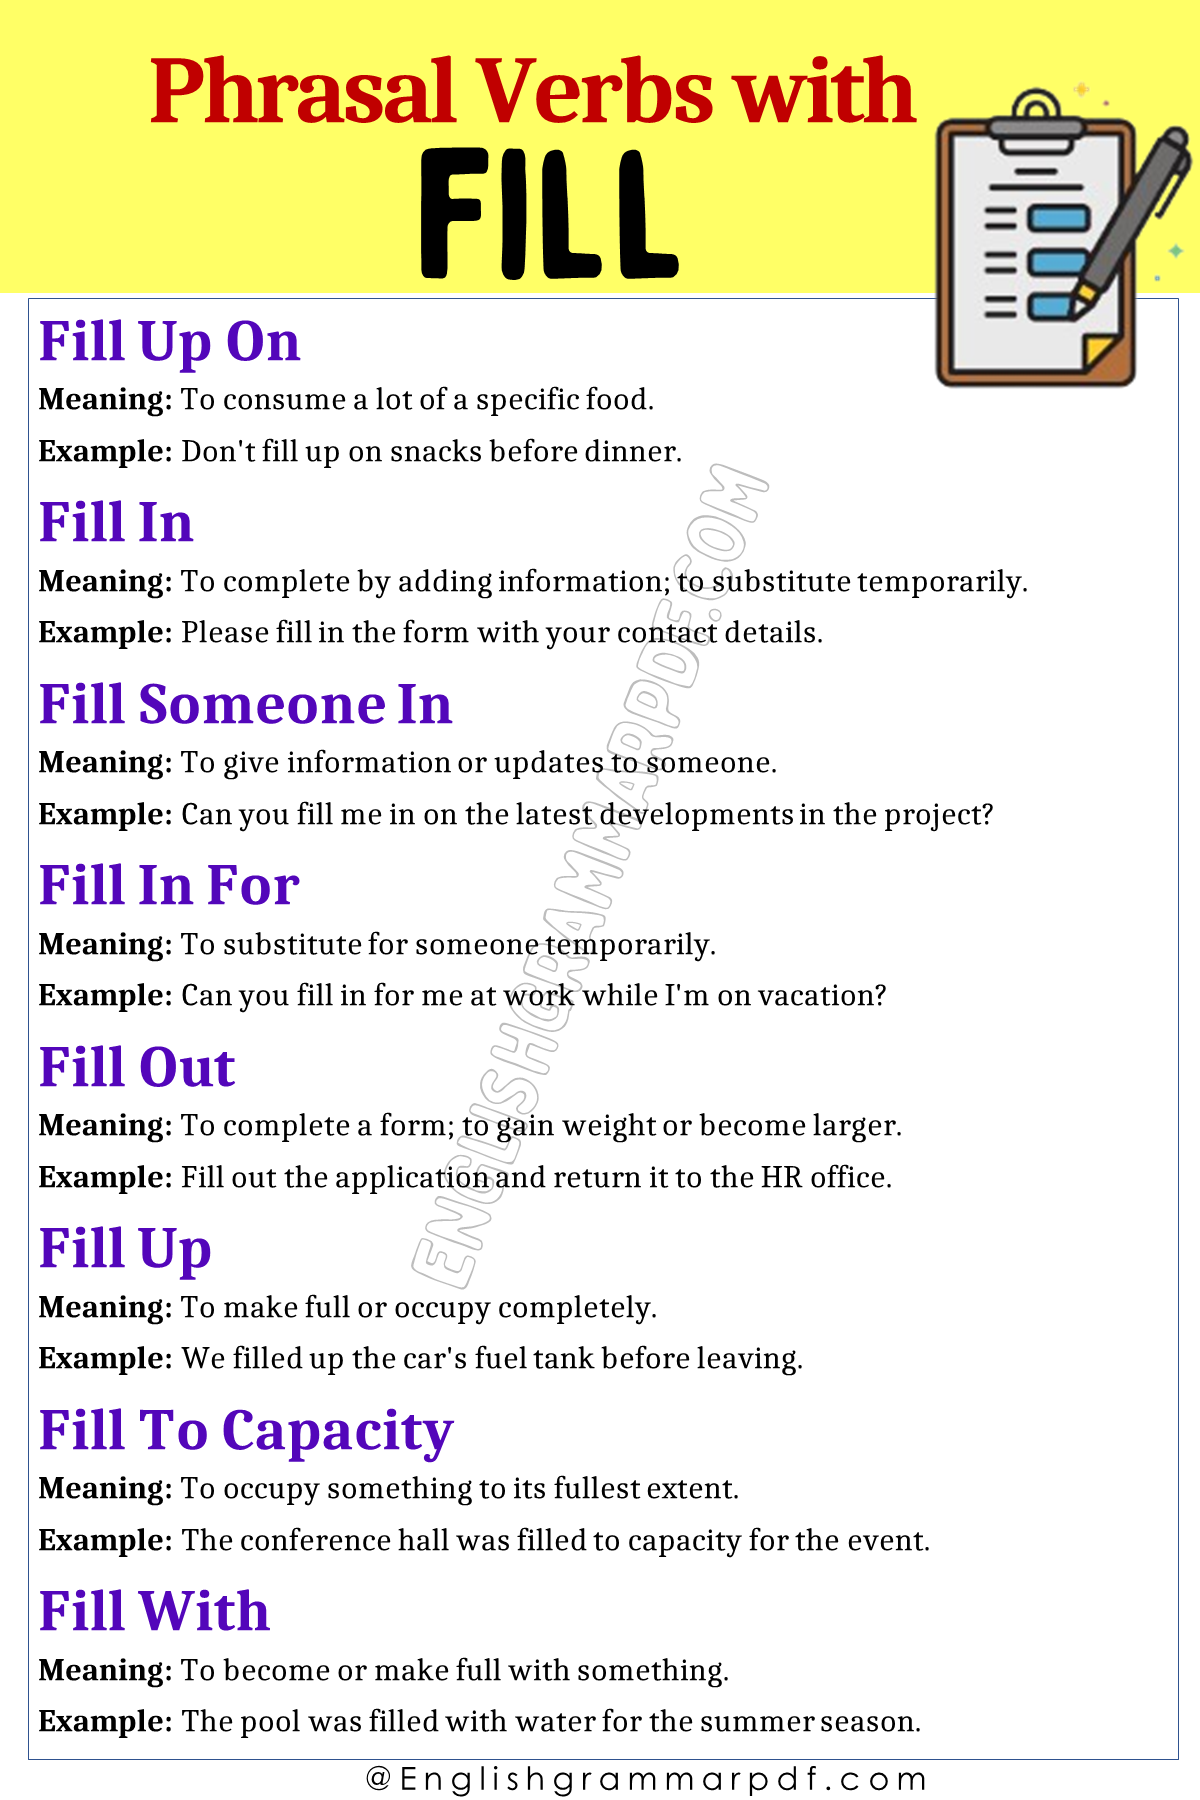 Phrasal Verbs with Fill